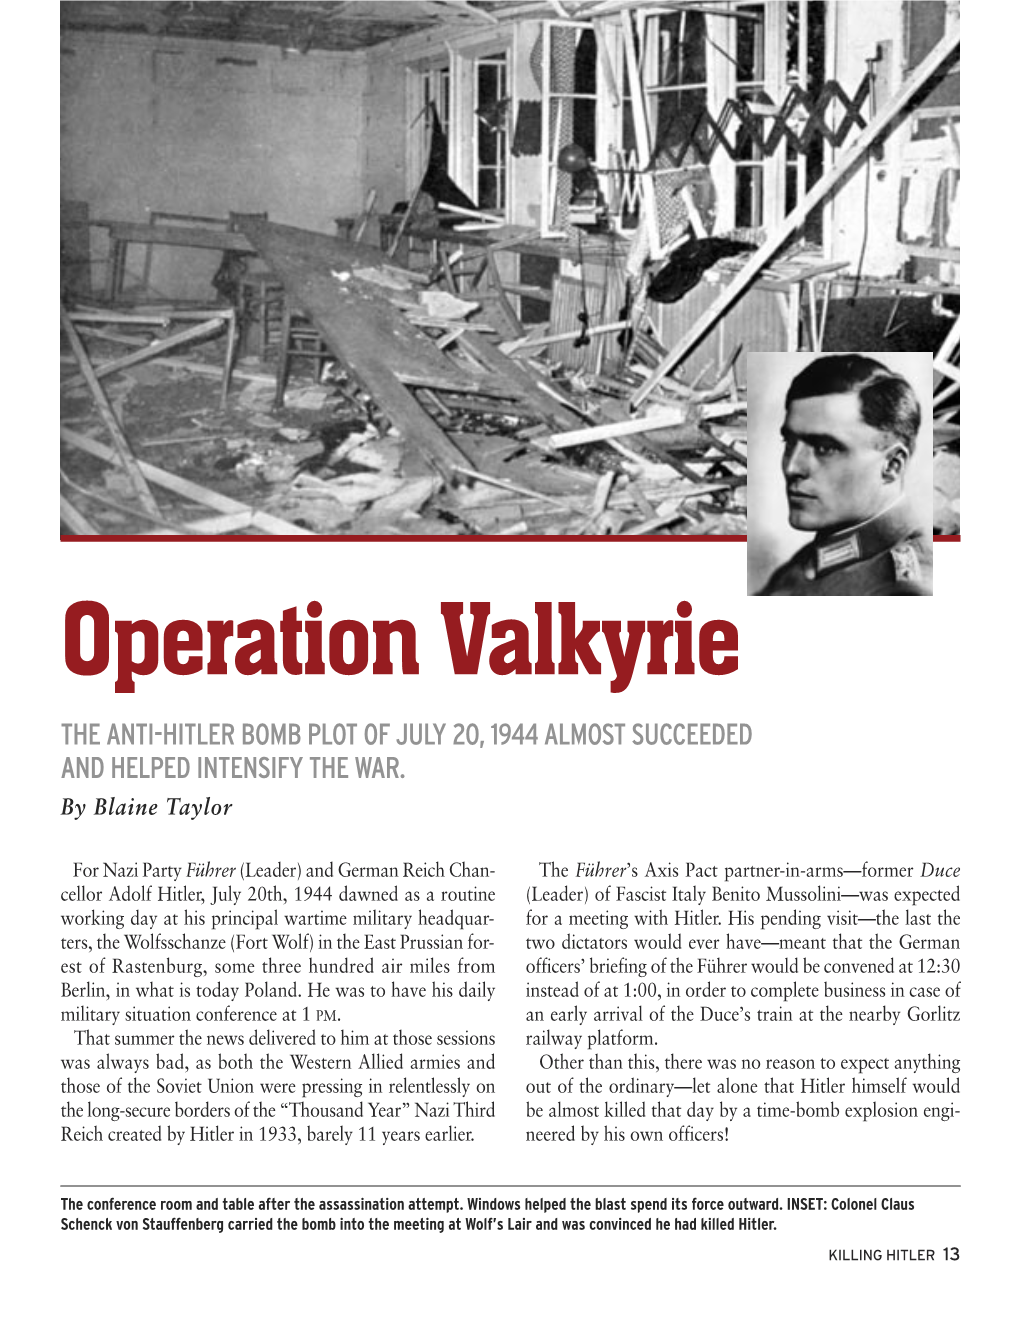 Operation Valkyrie the ANTI-HITLER BOMB PLOT of JULY 20, 1944 ALMOST SUCCEEDED and HELPED INTENSIFY the WAR